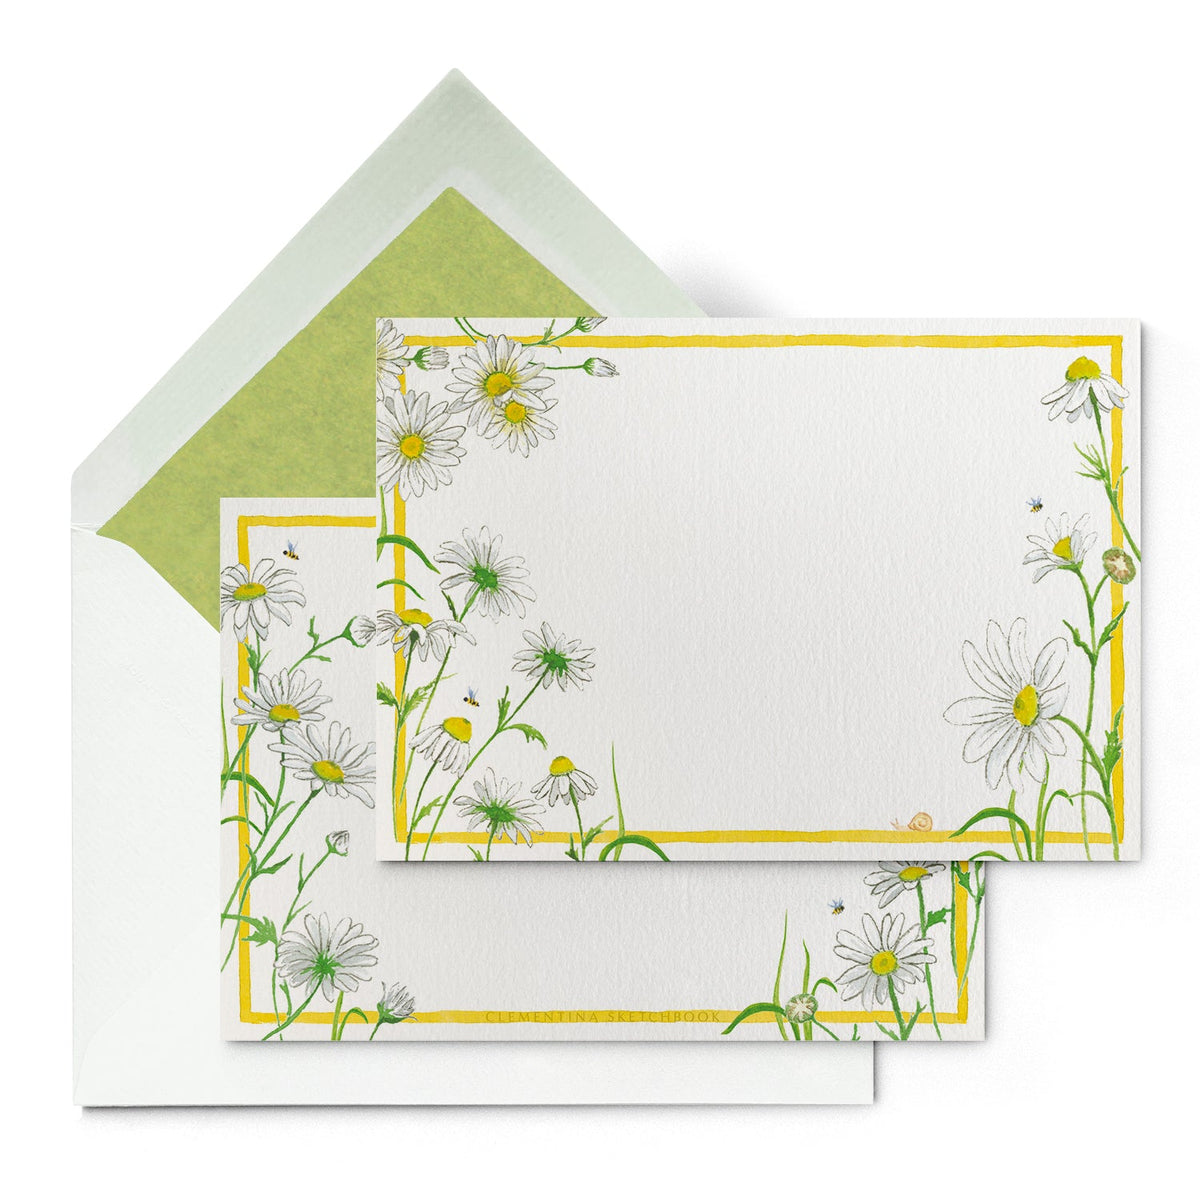 Daisies Stationery Cards, Personalized Set of 50